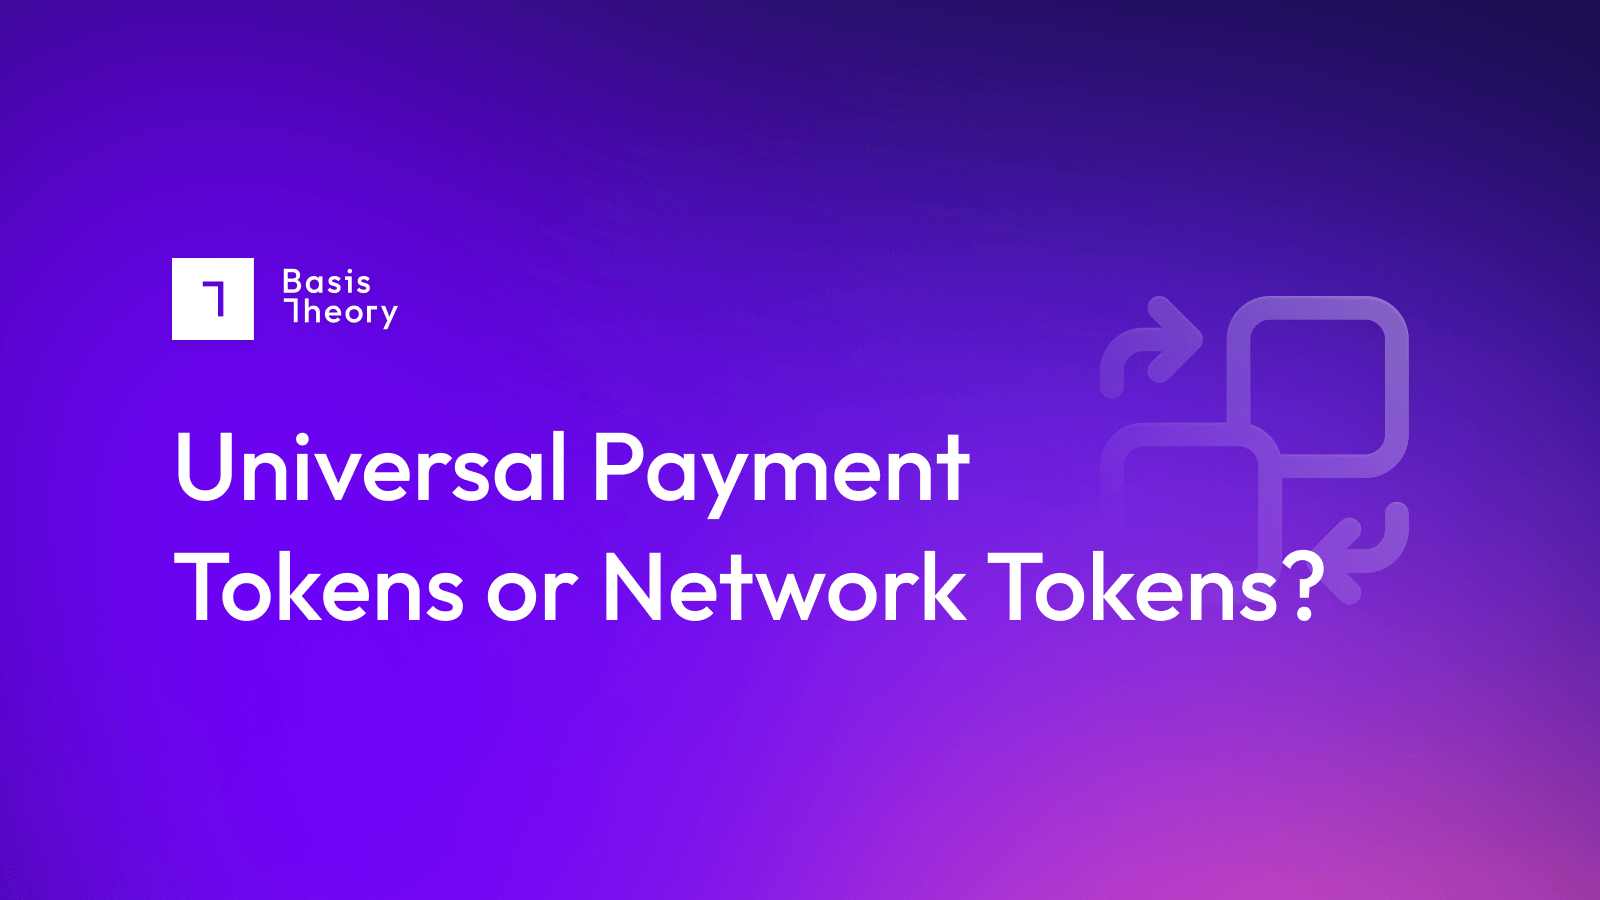 Universal Payment Tokens or Network Tokens?